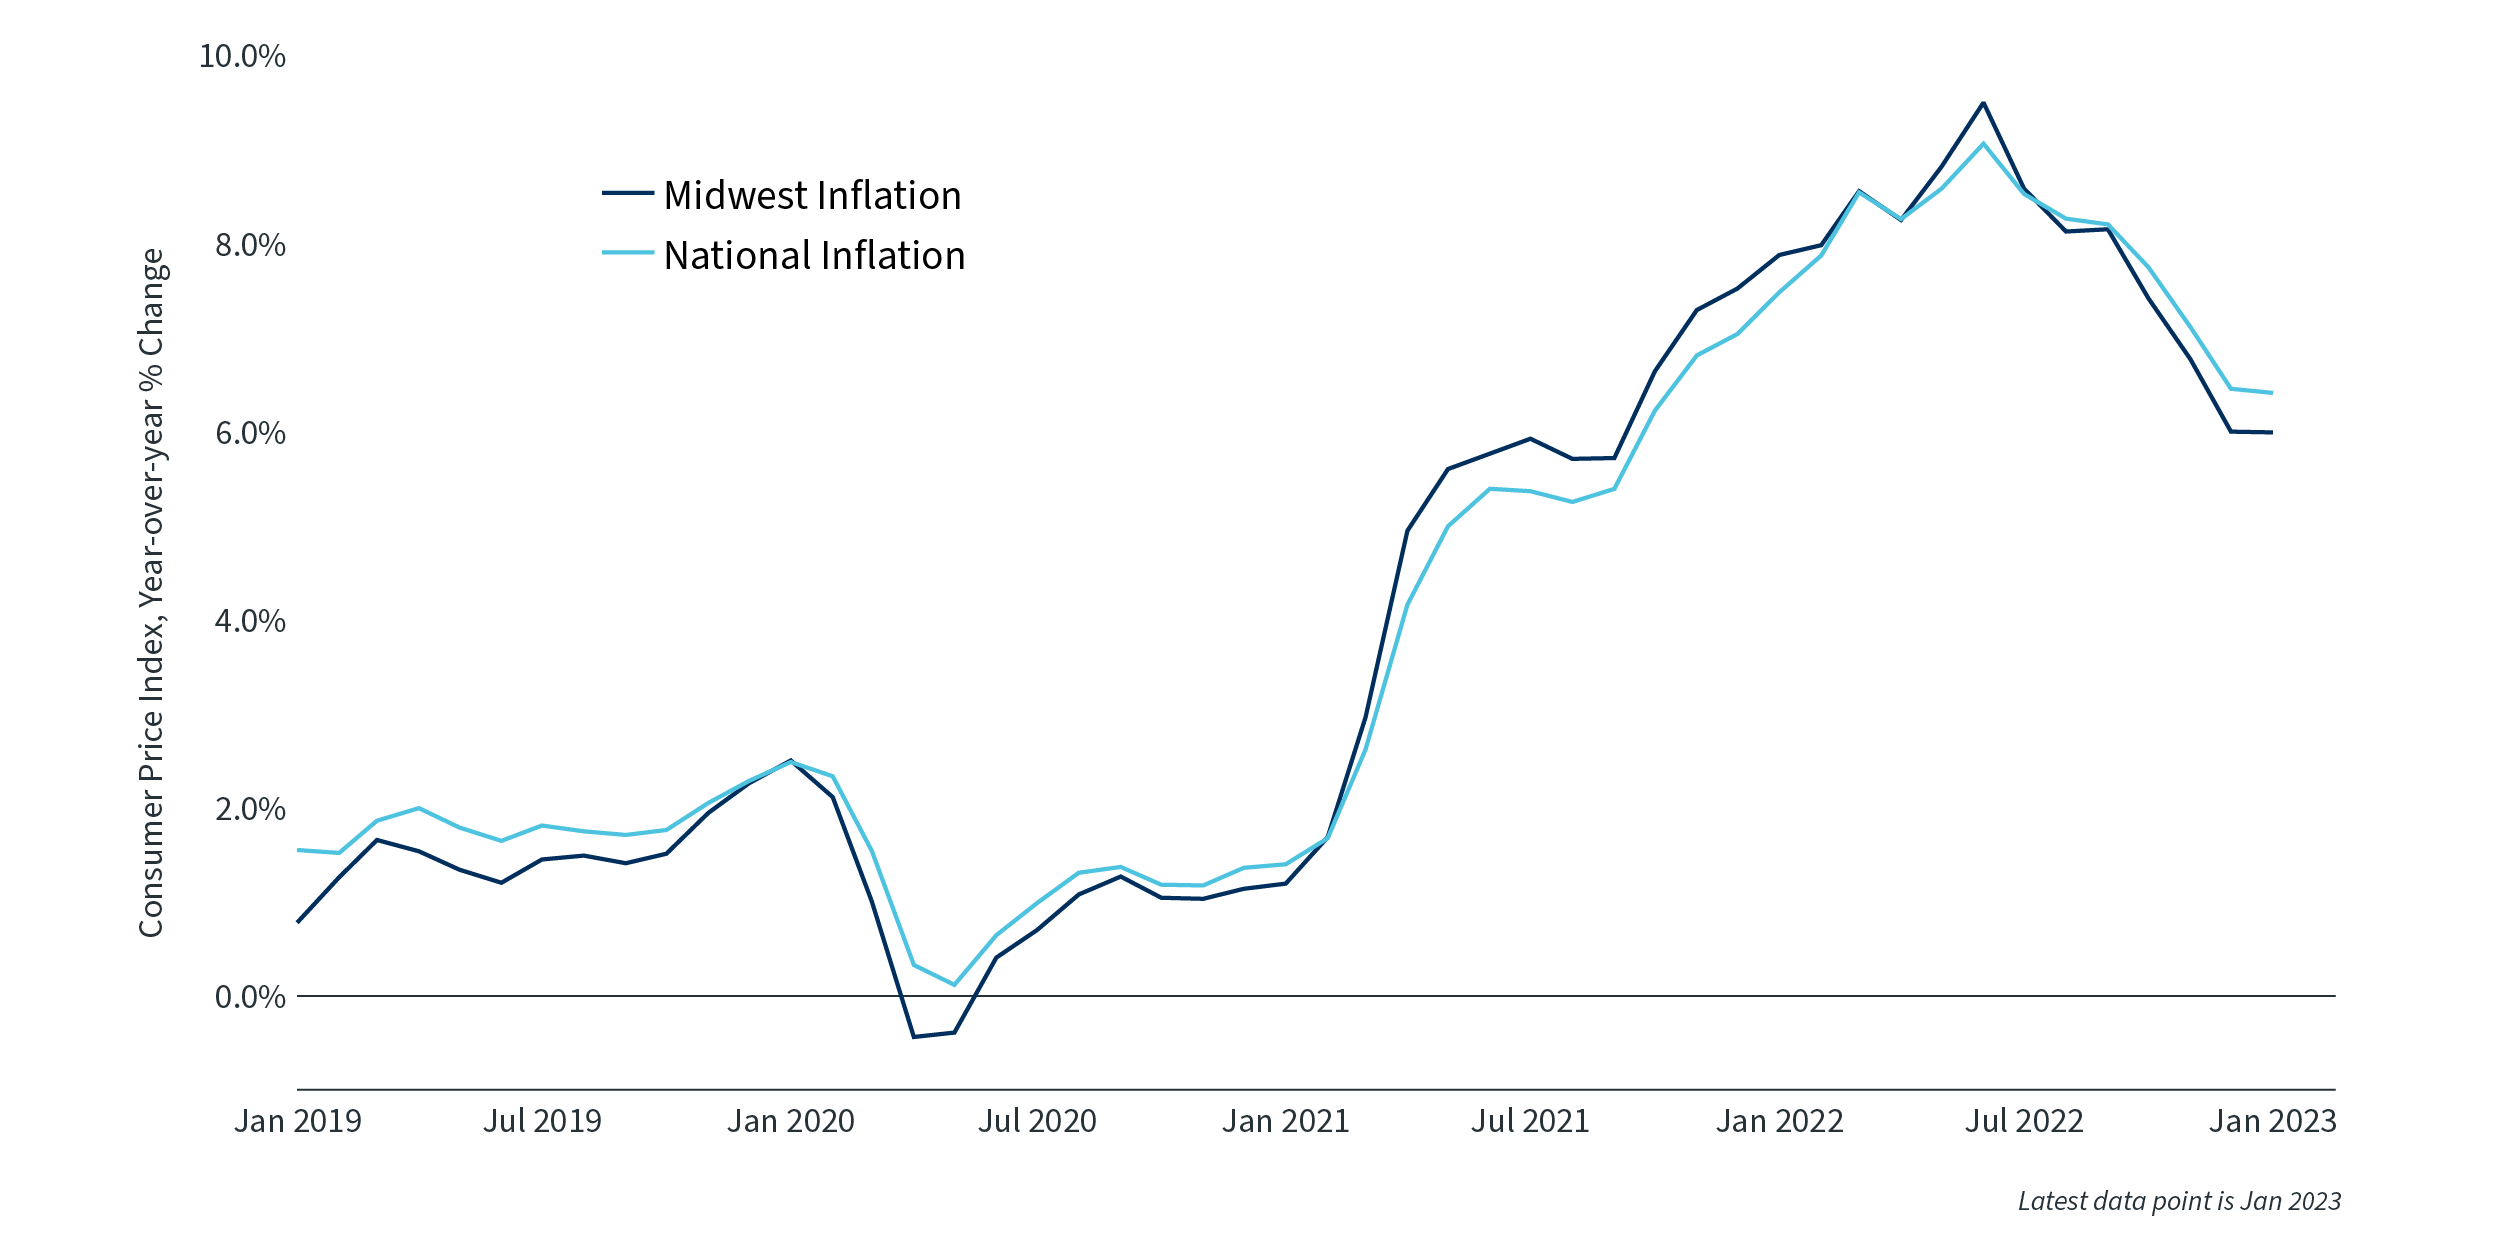 Image > Inflation in the Midwest region